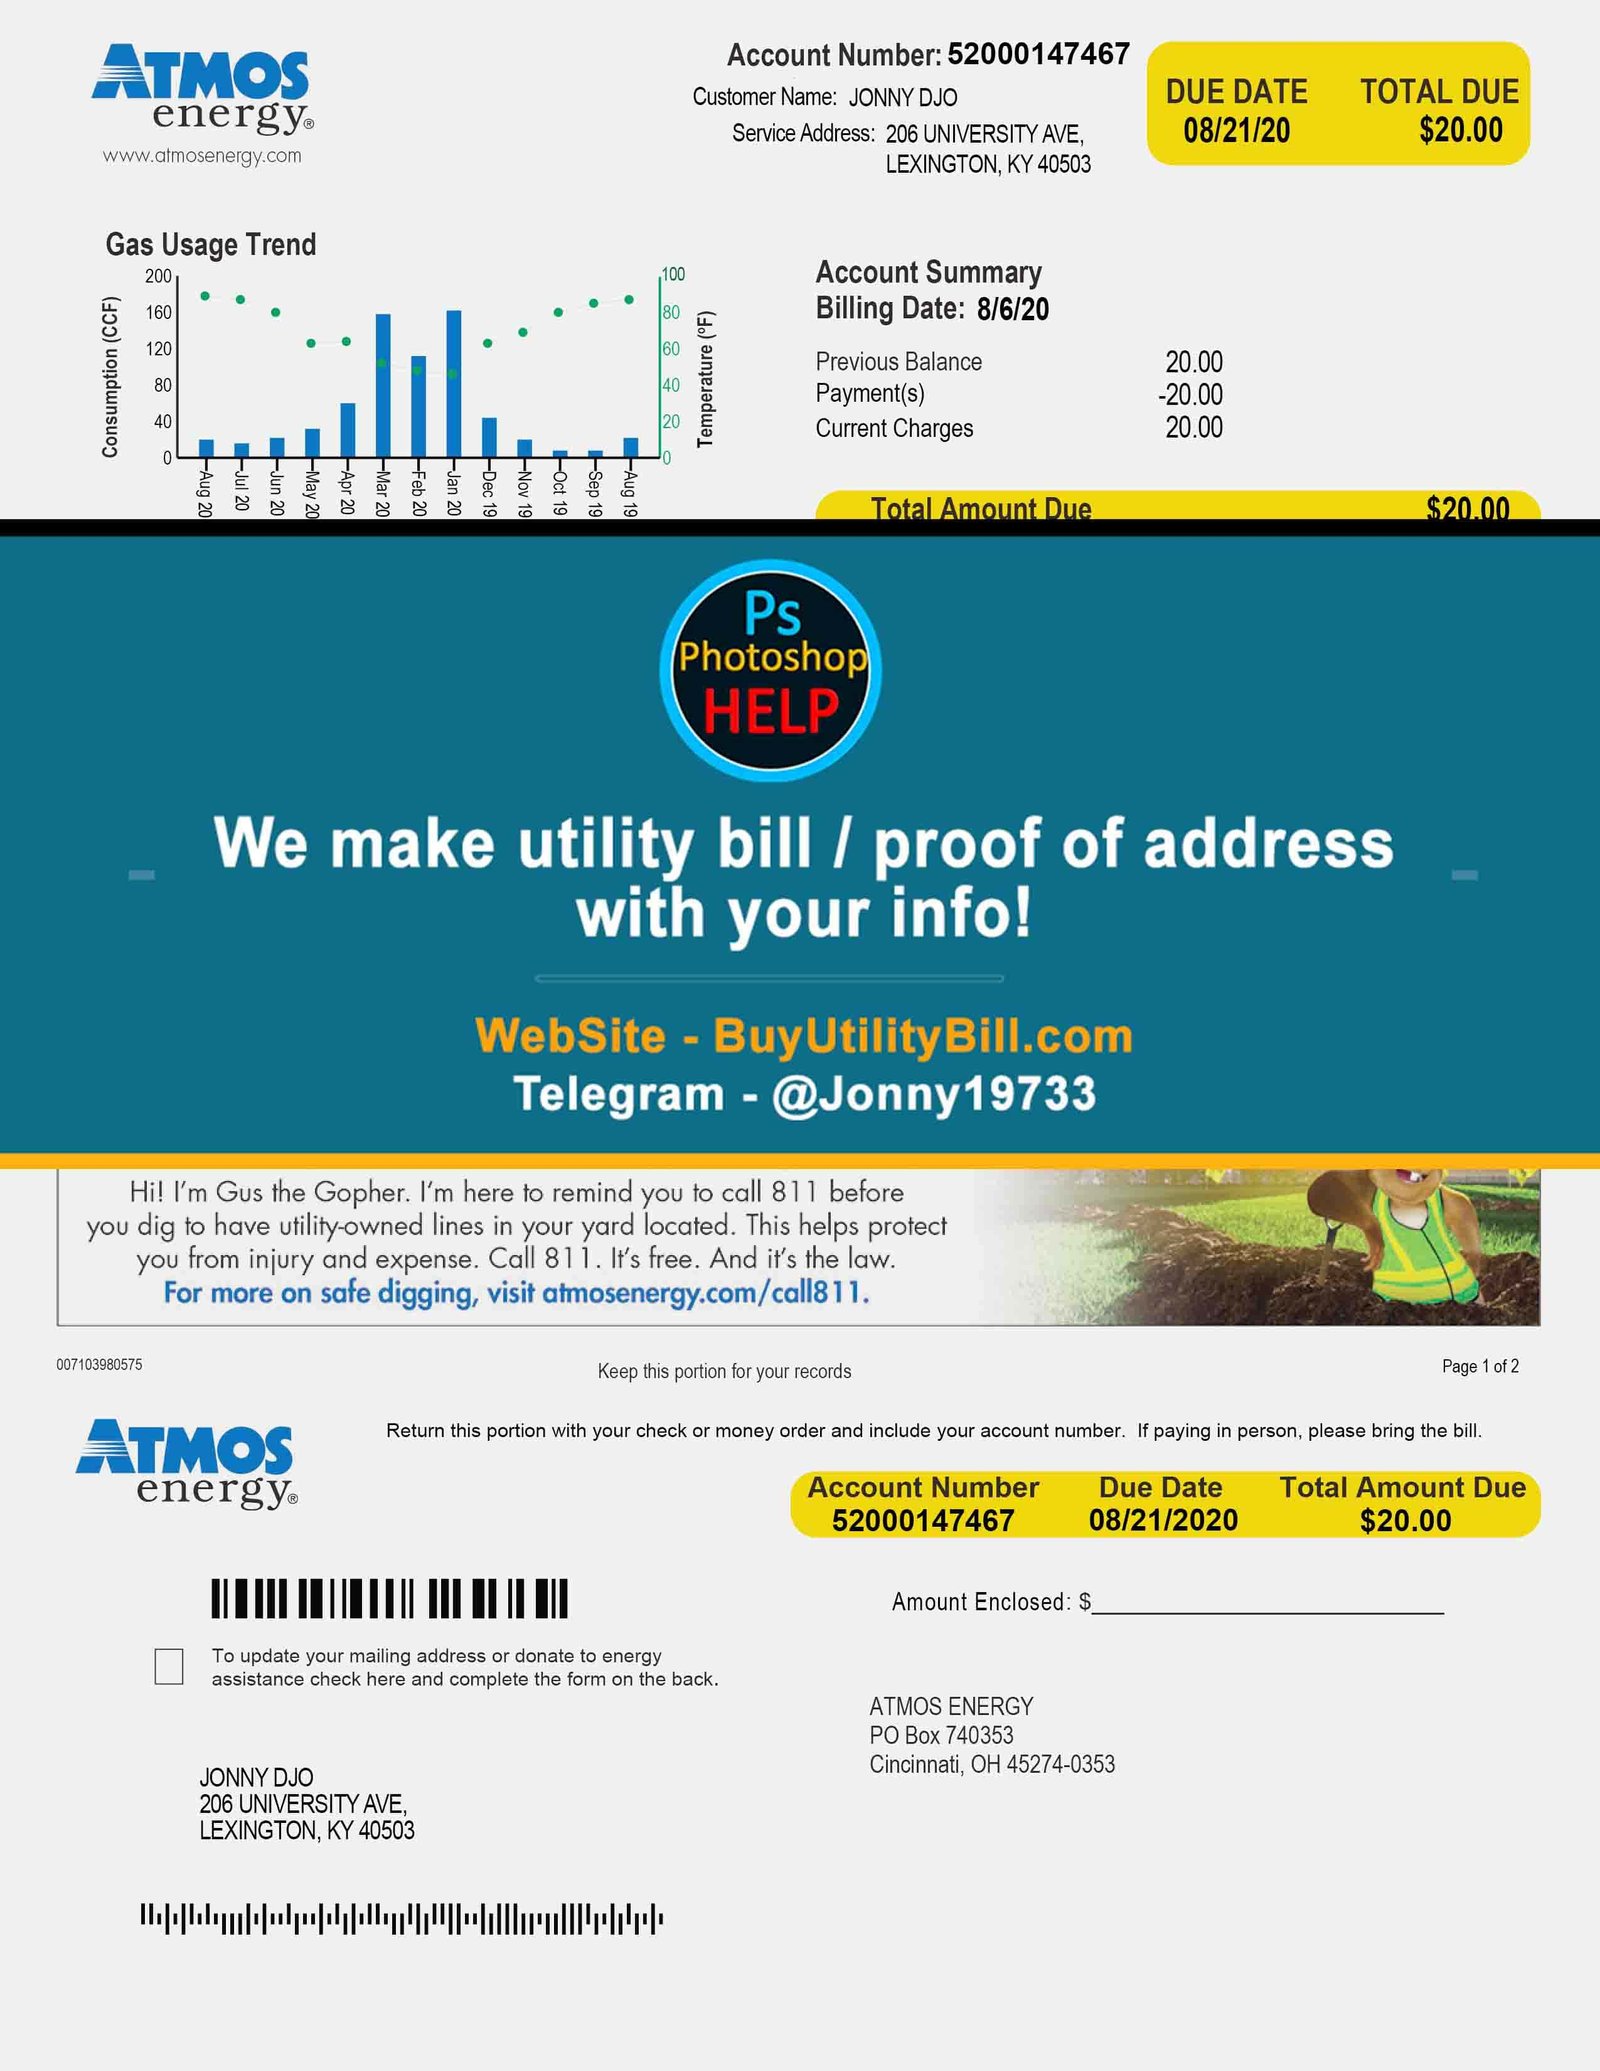 Kentucky USA fake Proof of address for electricity Atmos Energy Fake Utility bill